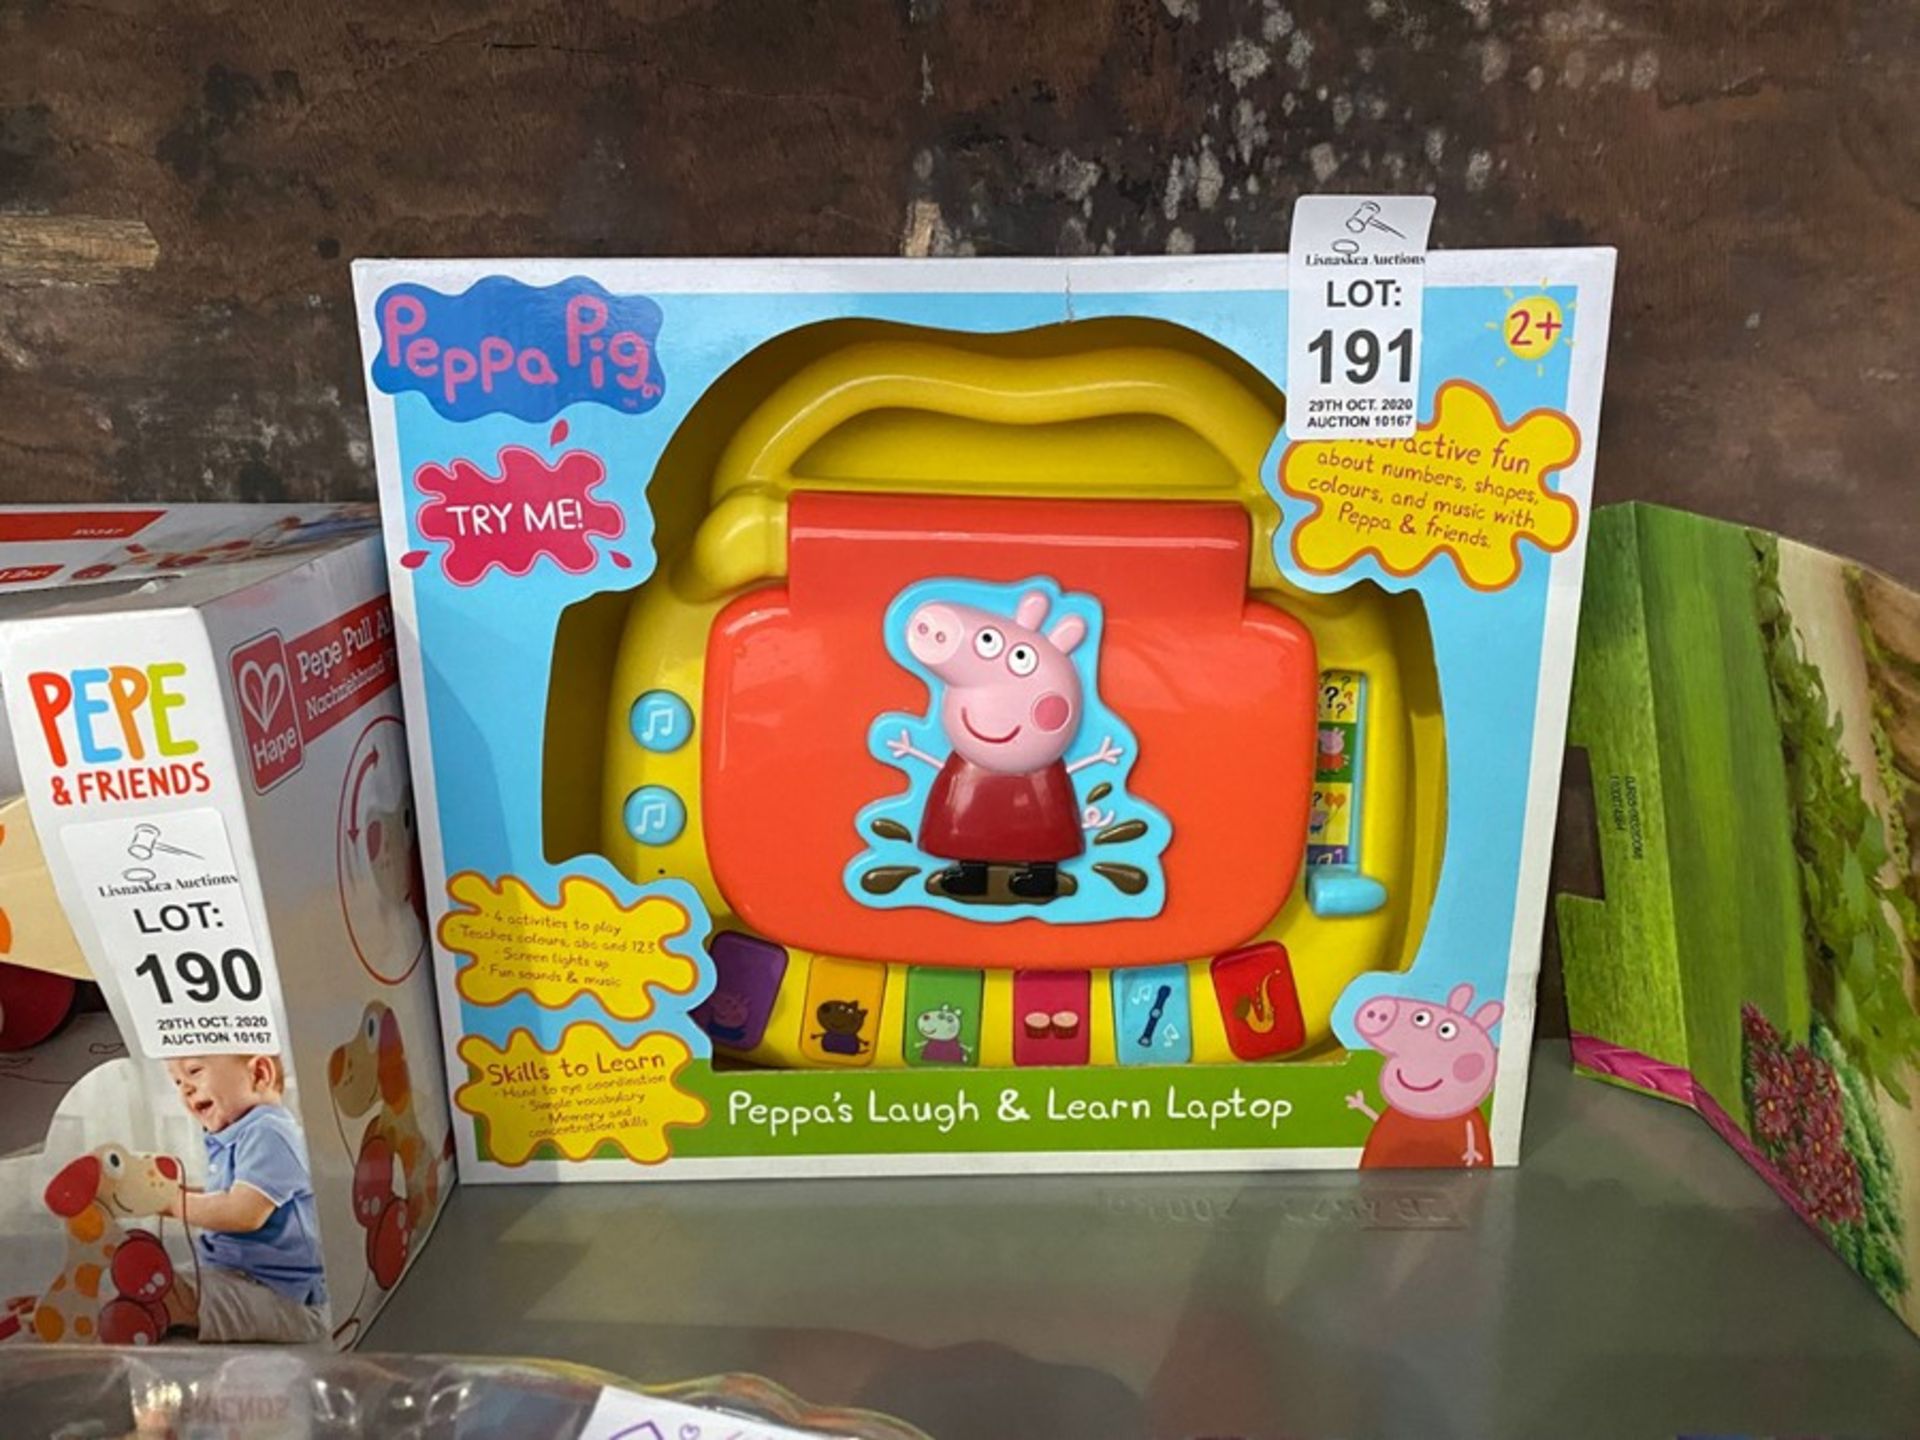 PEPPA PIC LAUGH AND LEARN LAPTOP